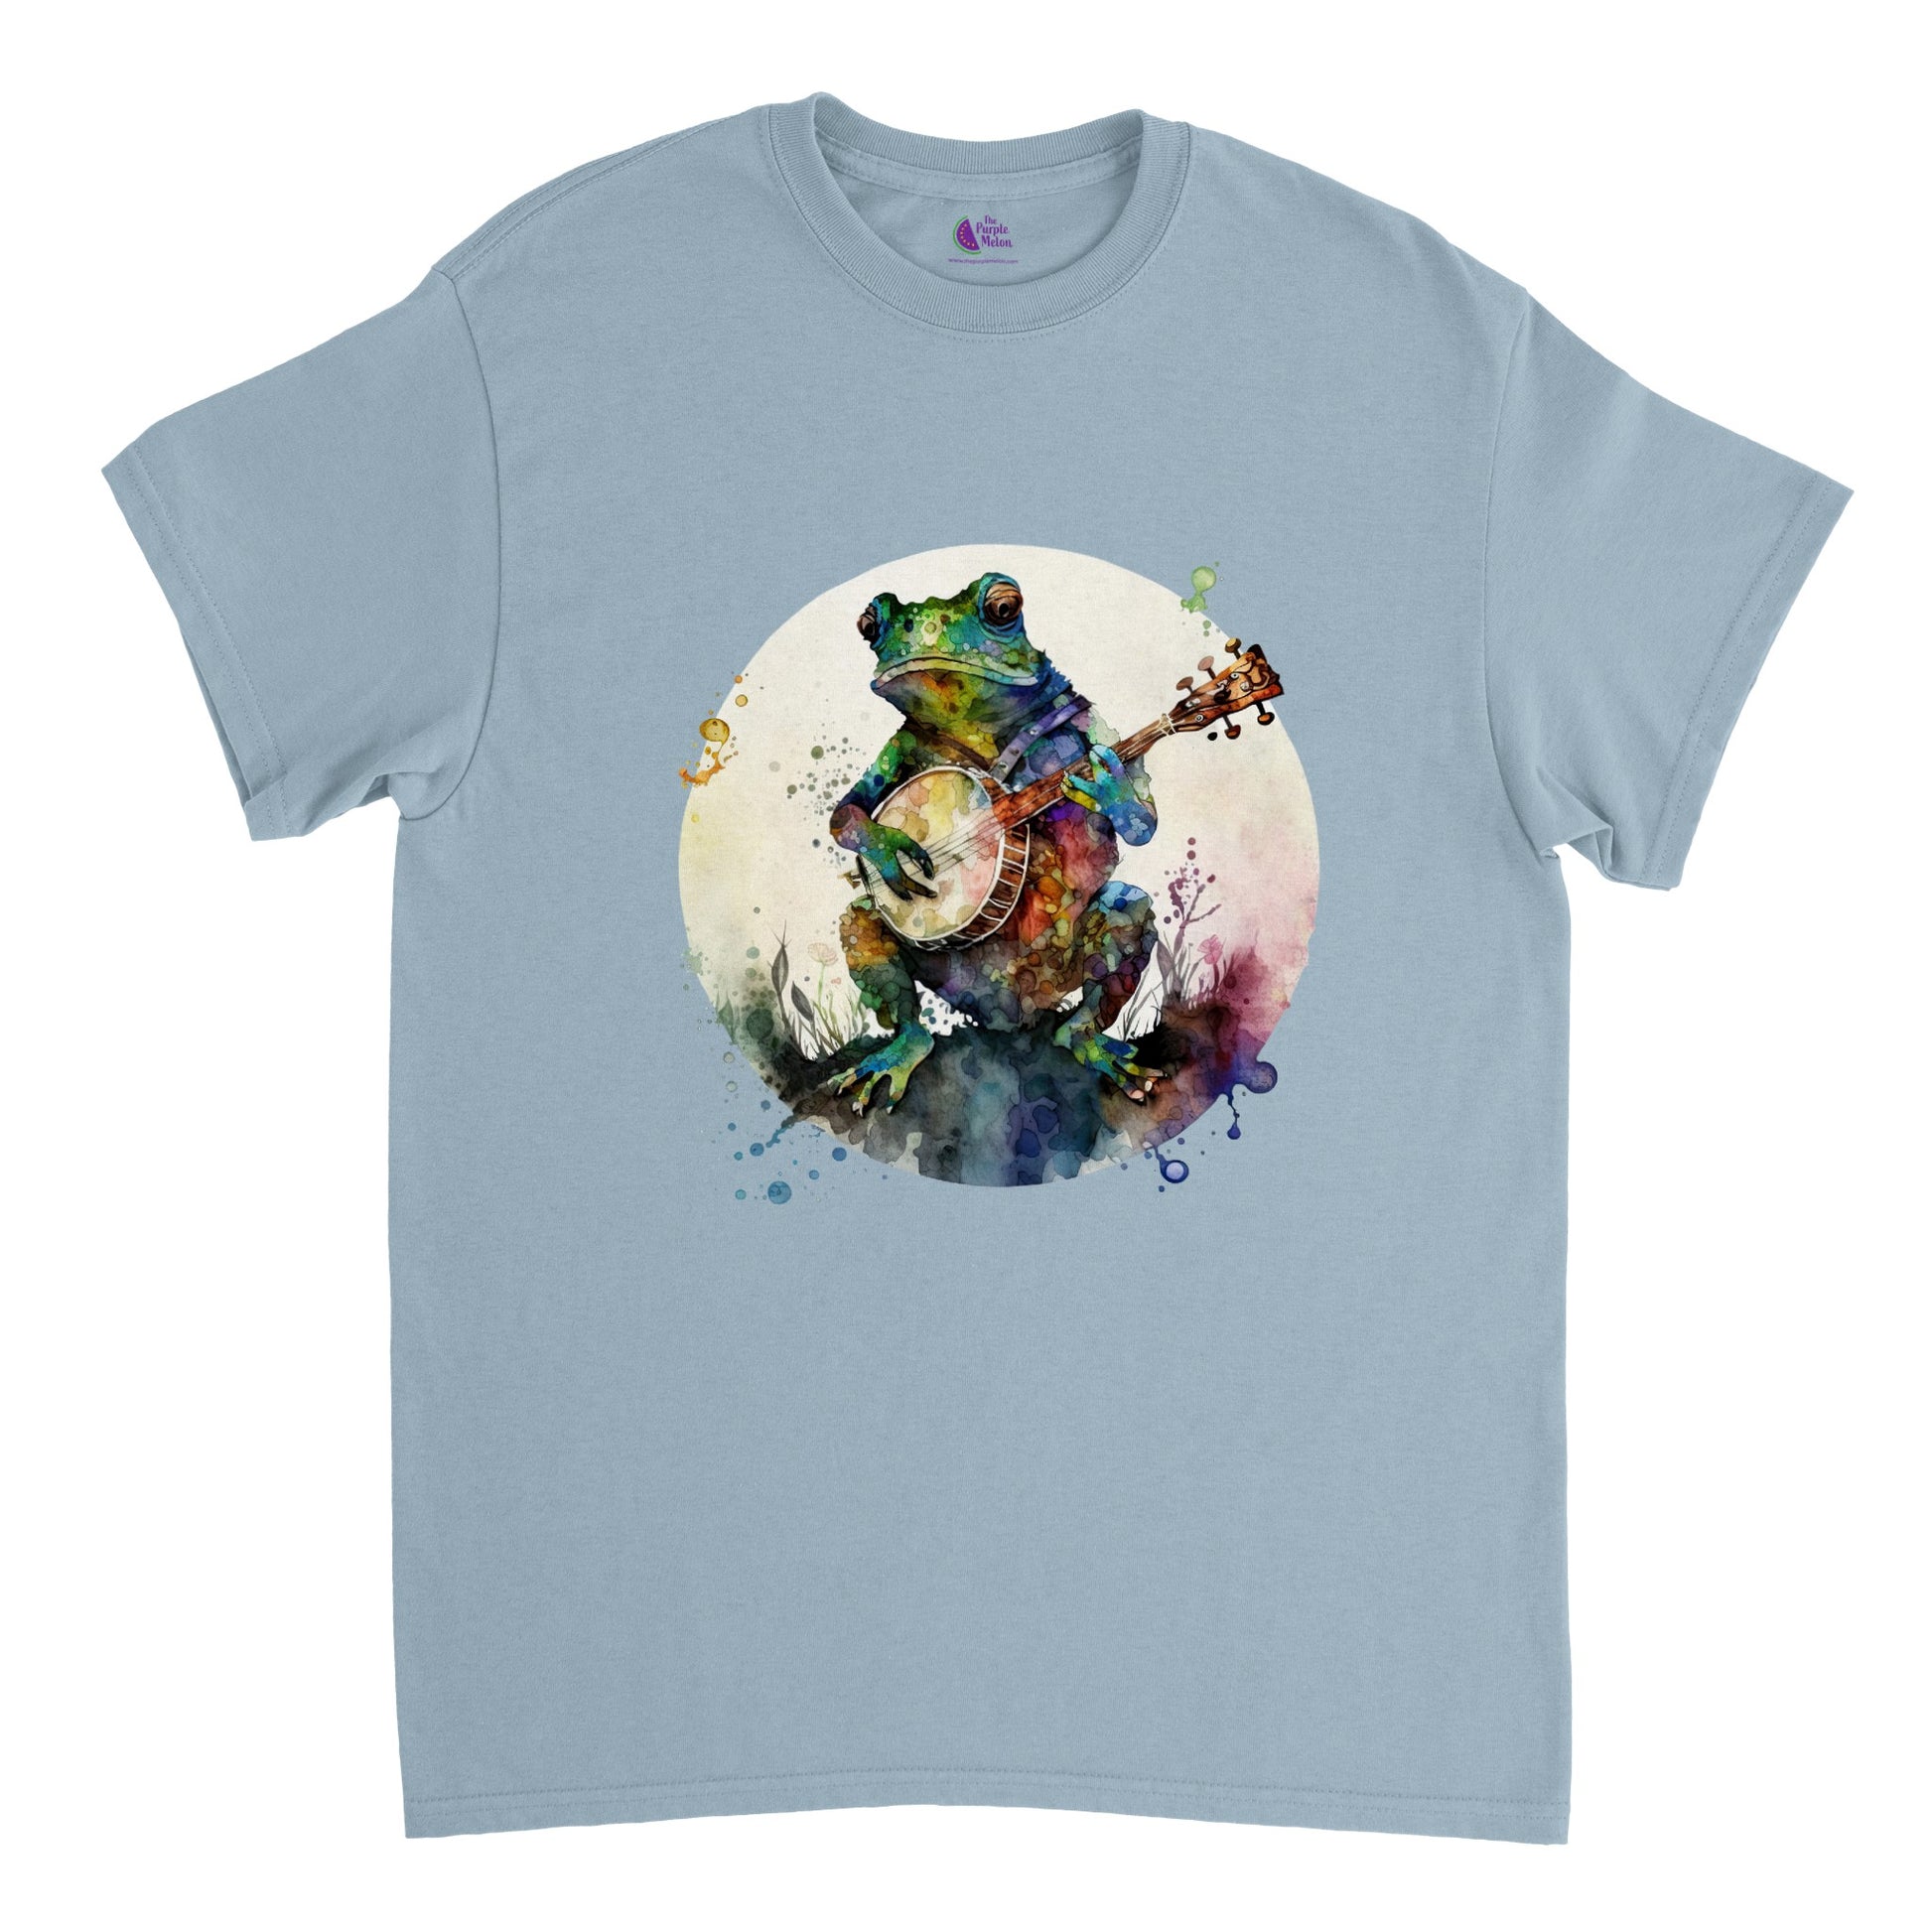 light blue t-shirt with a frog playing a banjo print